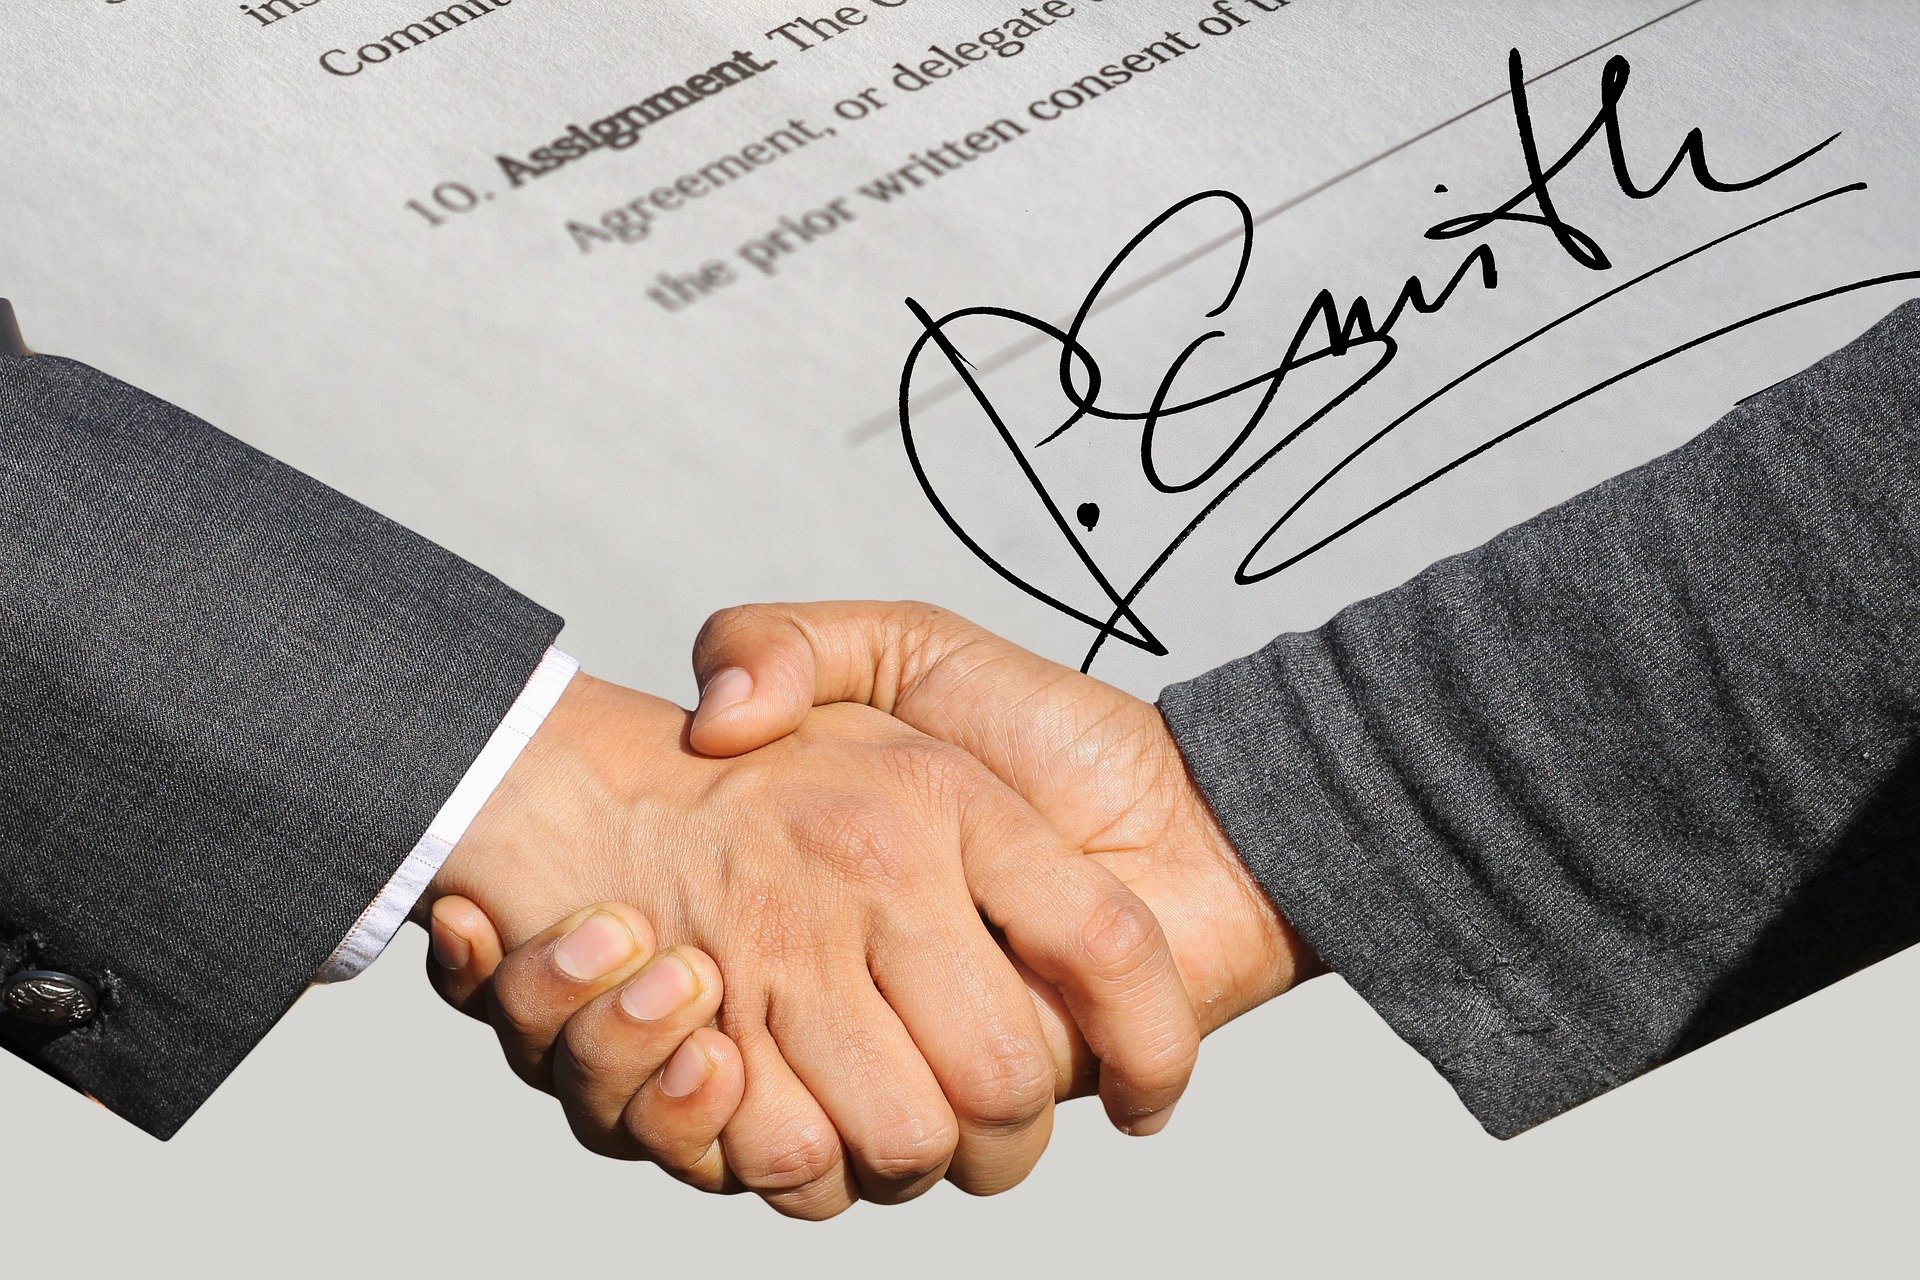 HOW TO PROTECT YOUR CONTRACT RIGHTS AND NEGOTIATE BETTER AGREEMENTS